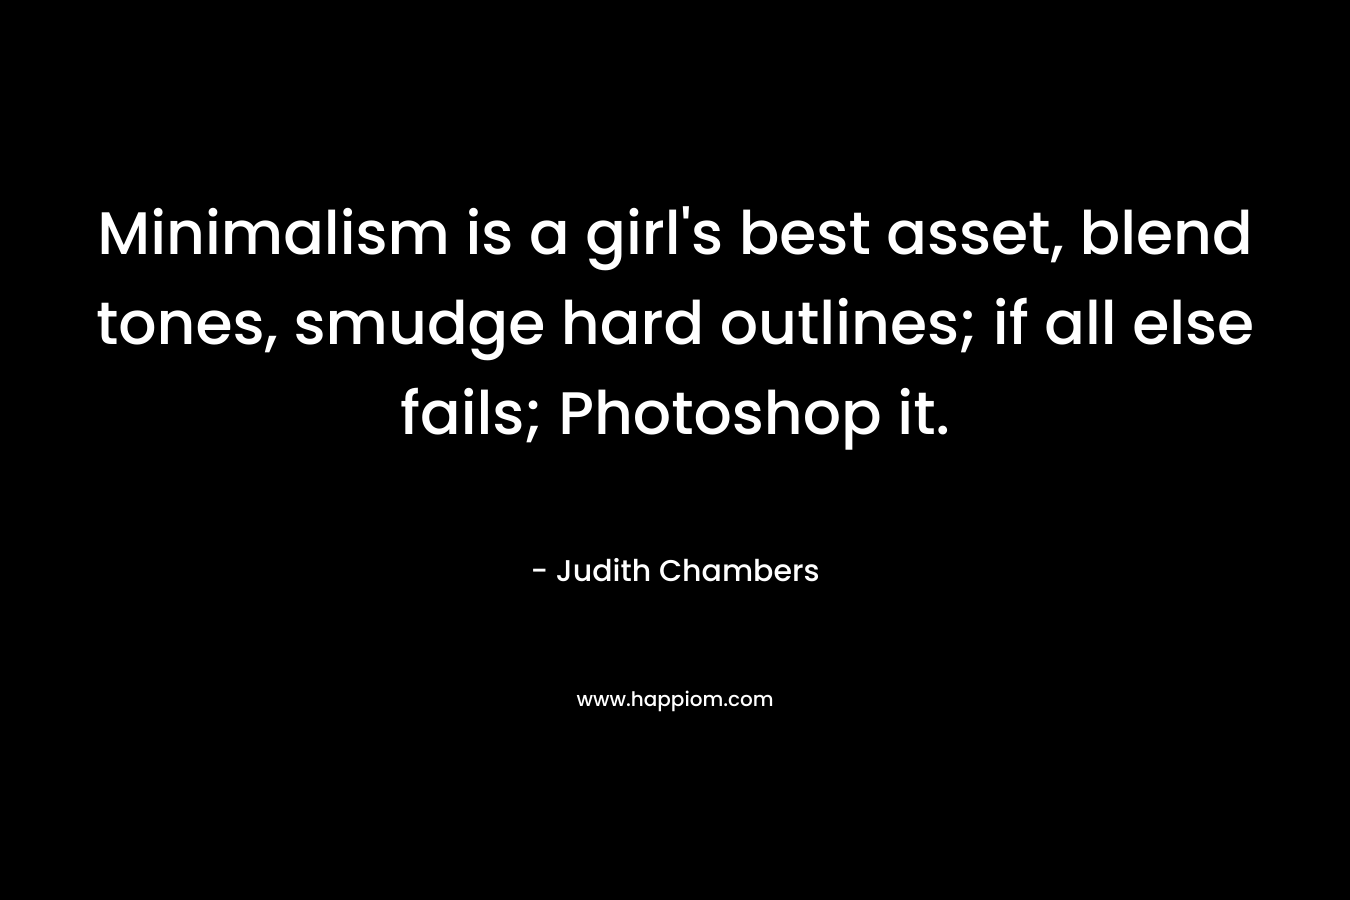 Minimalism is a girl’s best asset, blend tones, smudge hard outlines; if all else fails; Photoshop it. – Judith Chambers